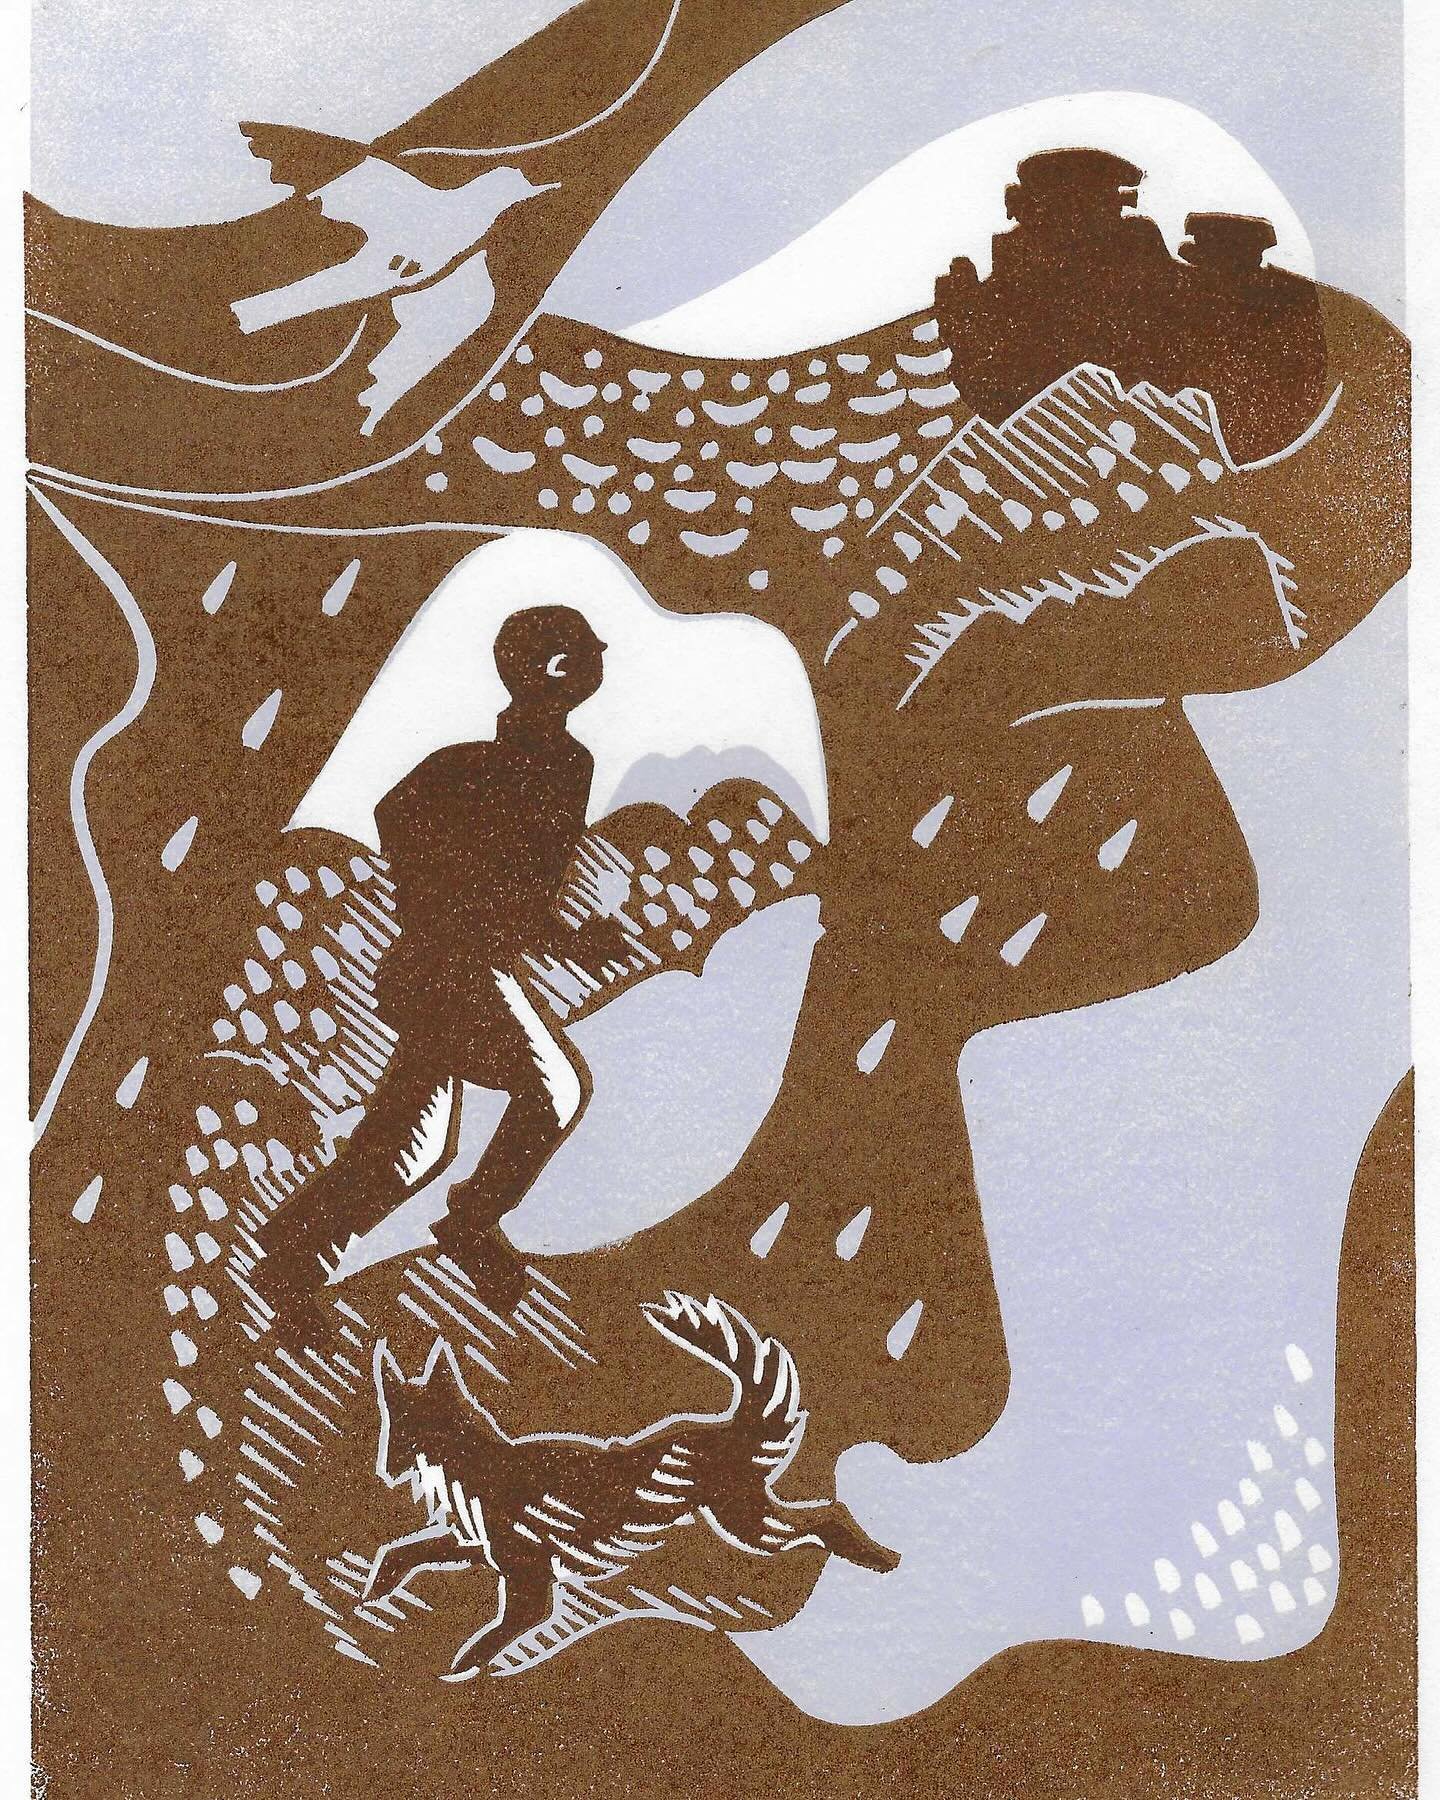 I have been working on a design for an author for a book cover. This is my Dartmoor and drama inspired image made in linocut. I loved working on this design and with Rachel. 

#bookcover #bookillustration #linocut #printmaking #mananddog #dartmoor #c